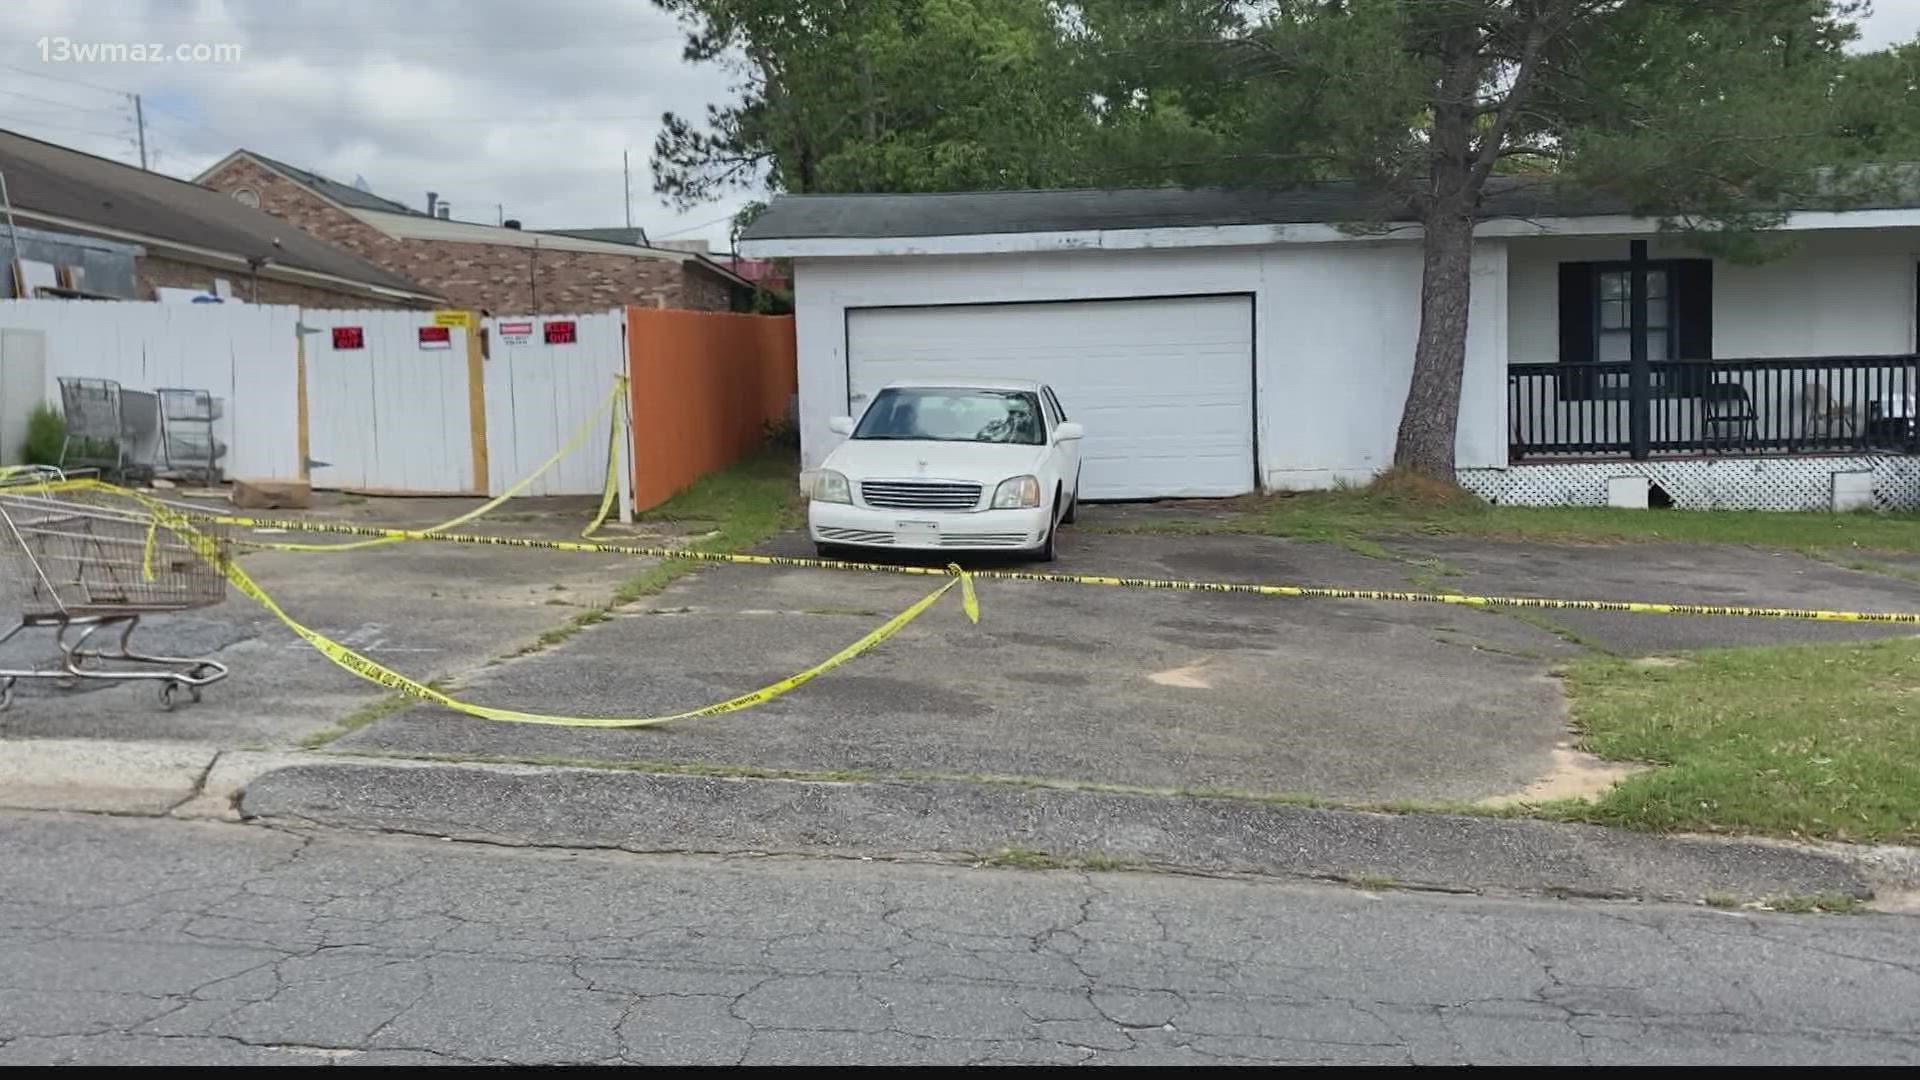 Warner Robins Police are investigating after a shooting left a man dead Saturday night.